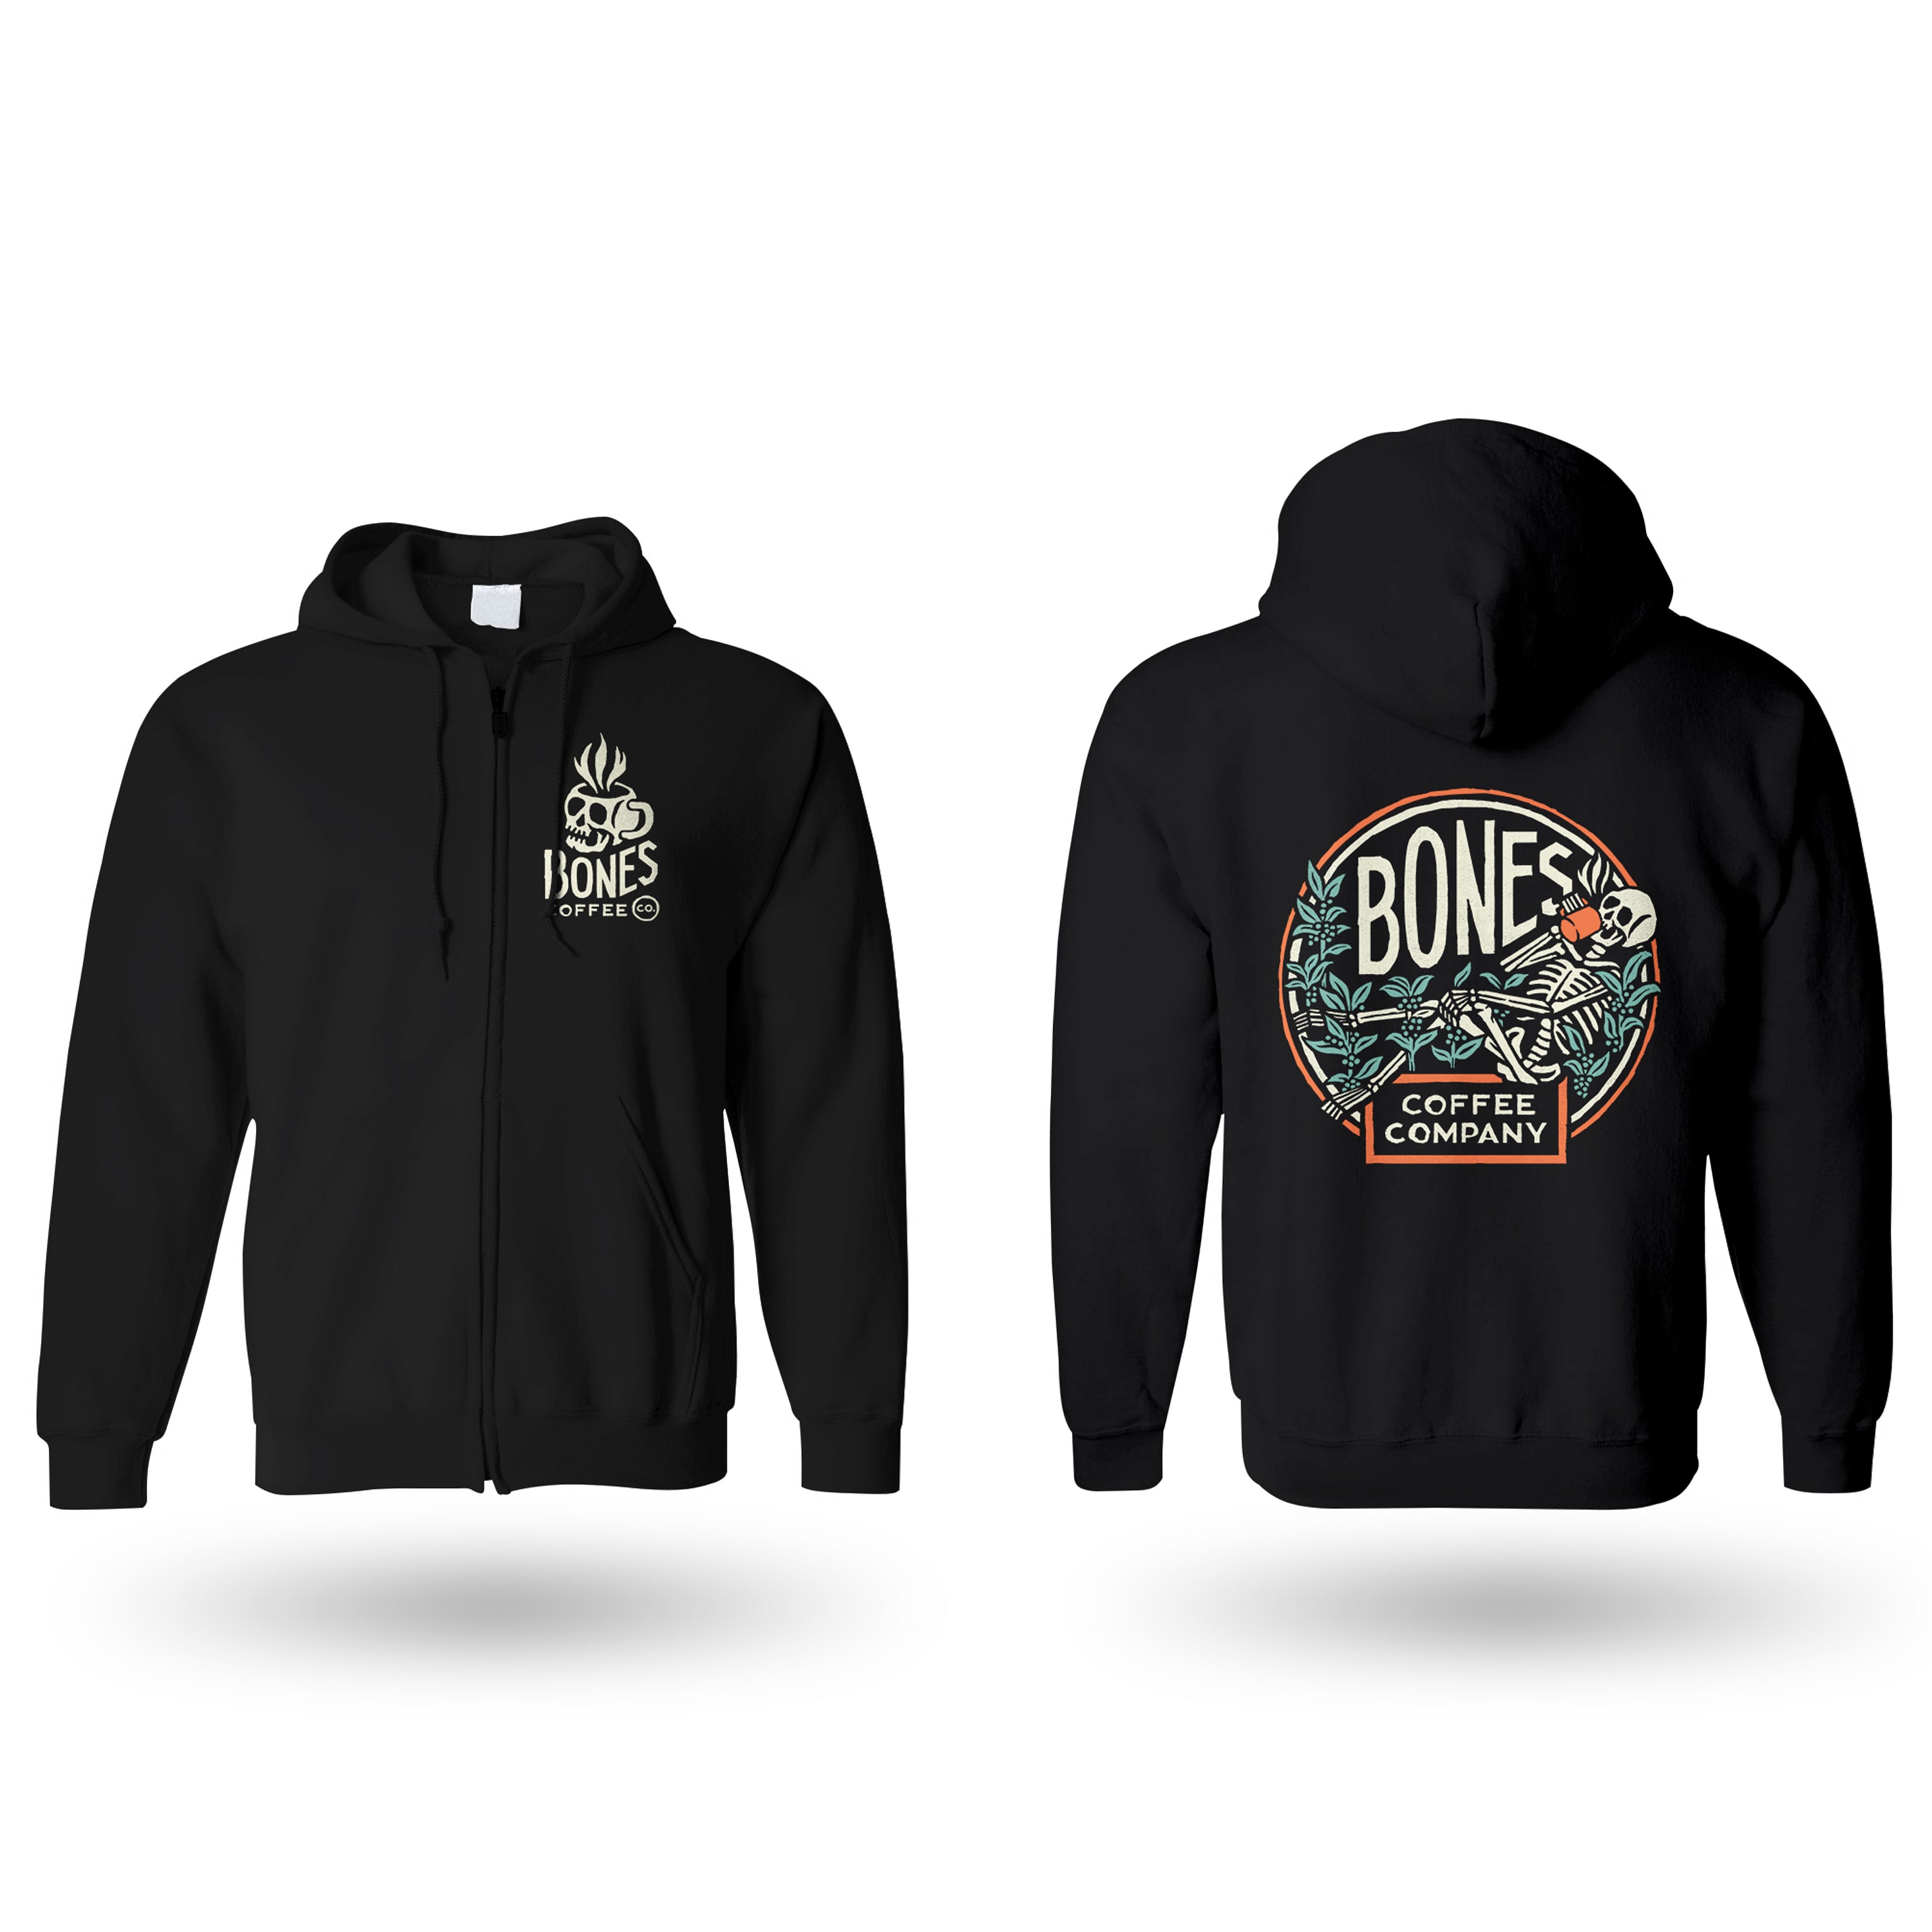 The front and back of the classic Bones Coffee Company logo. The back has the classic logo for the Bones Coffee Company while the front has the skull logo for Bones Coffee Company on it.